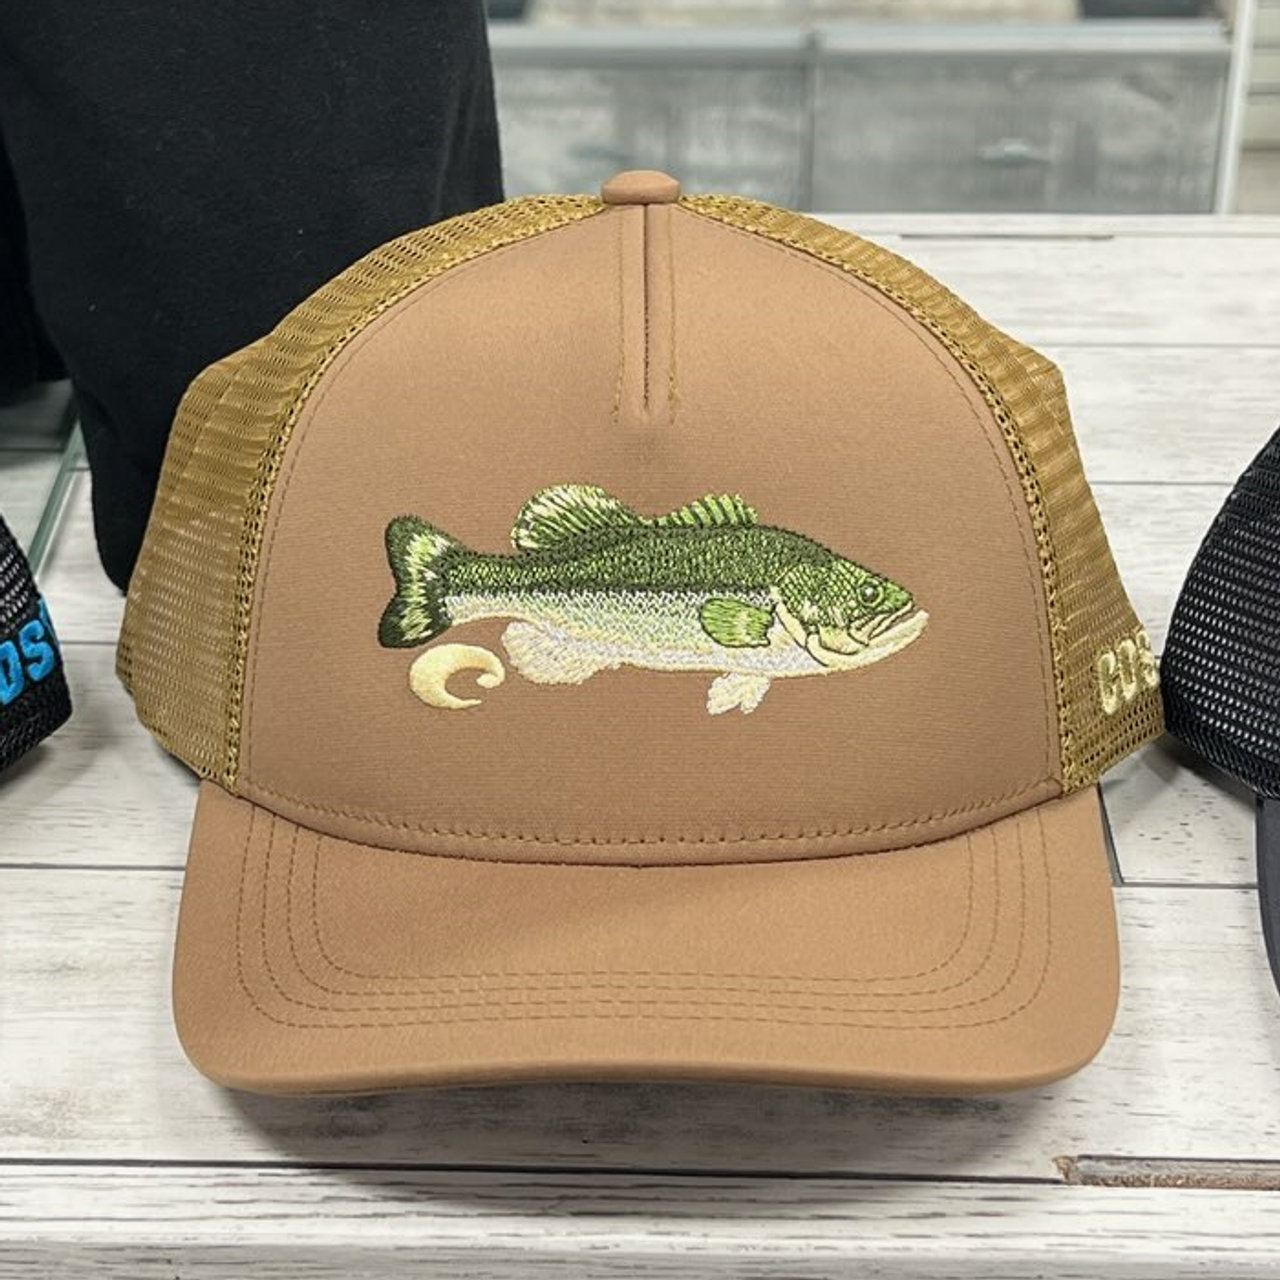 Costa Bass Stitched Trucker - Working Brown - Backcountry & Beyond